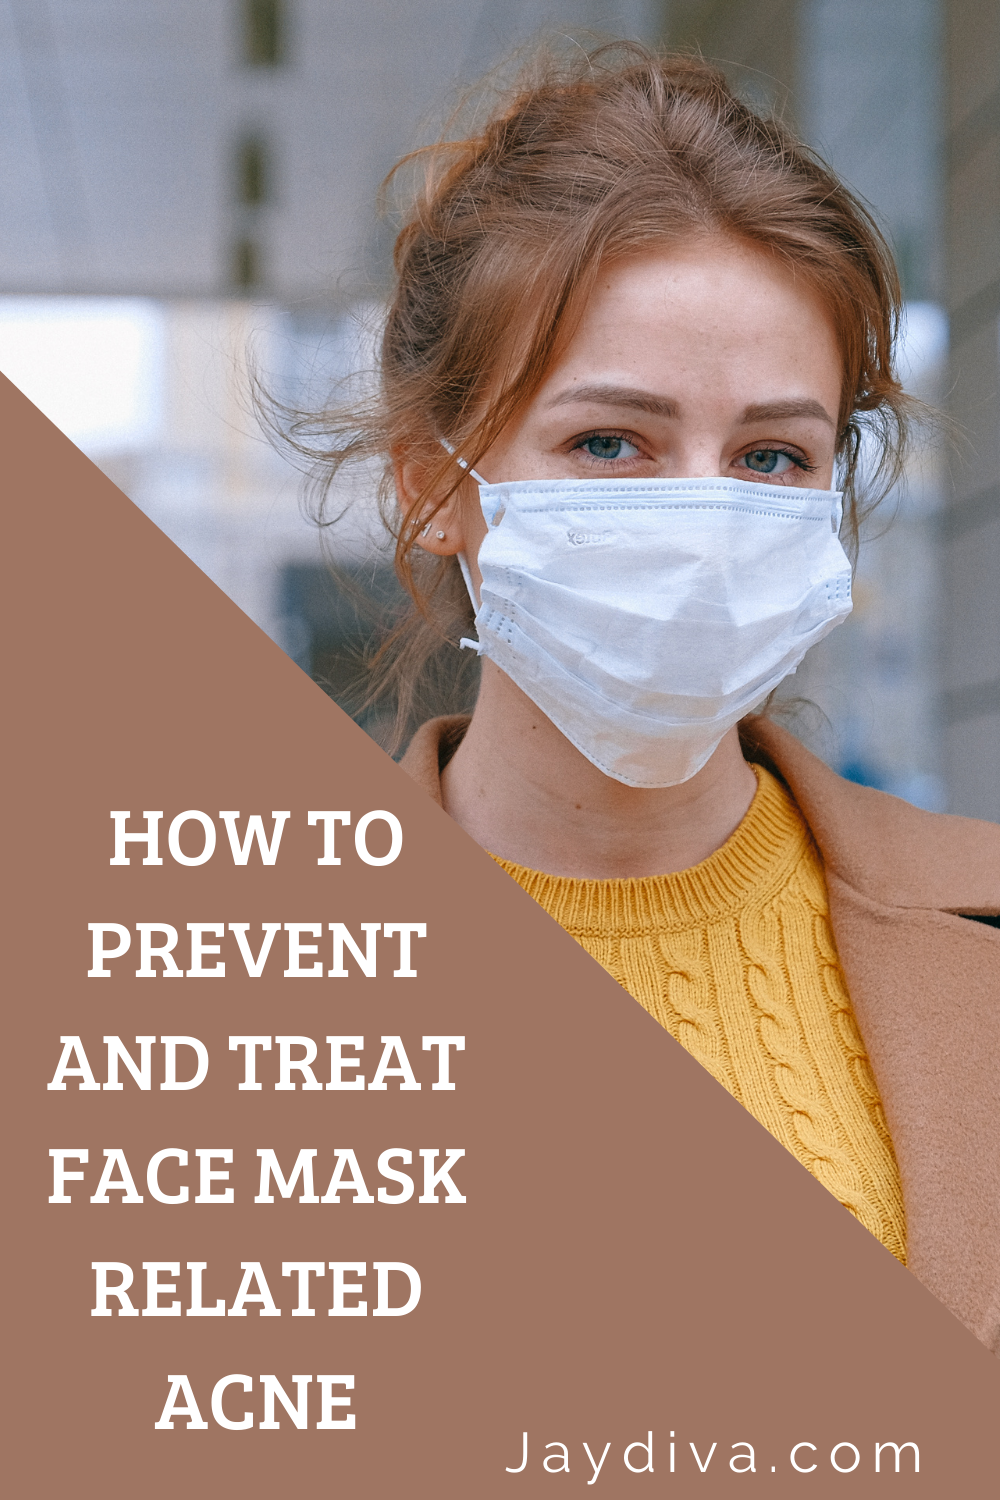 How to treat acne caused by face masks